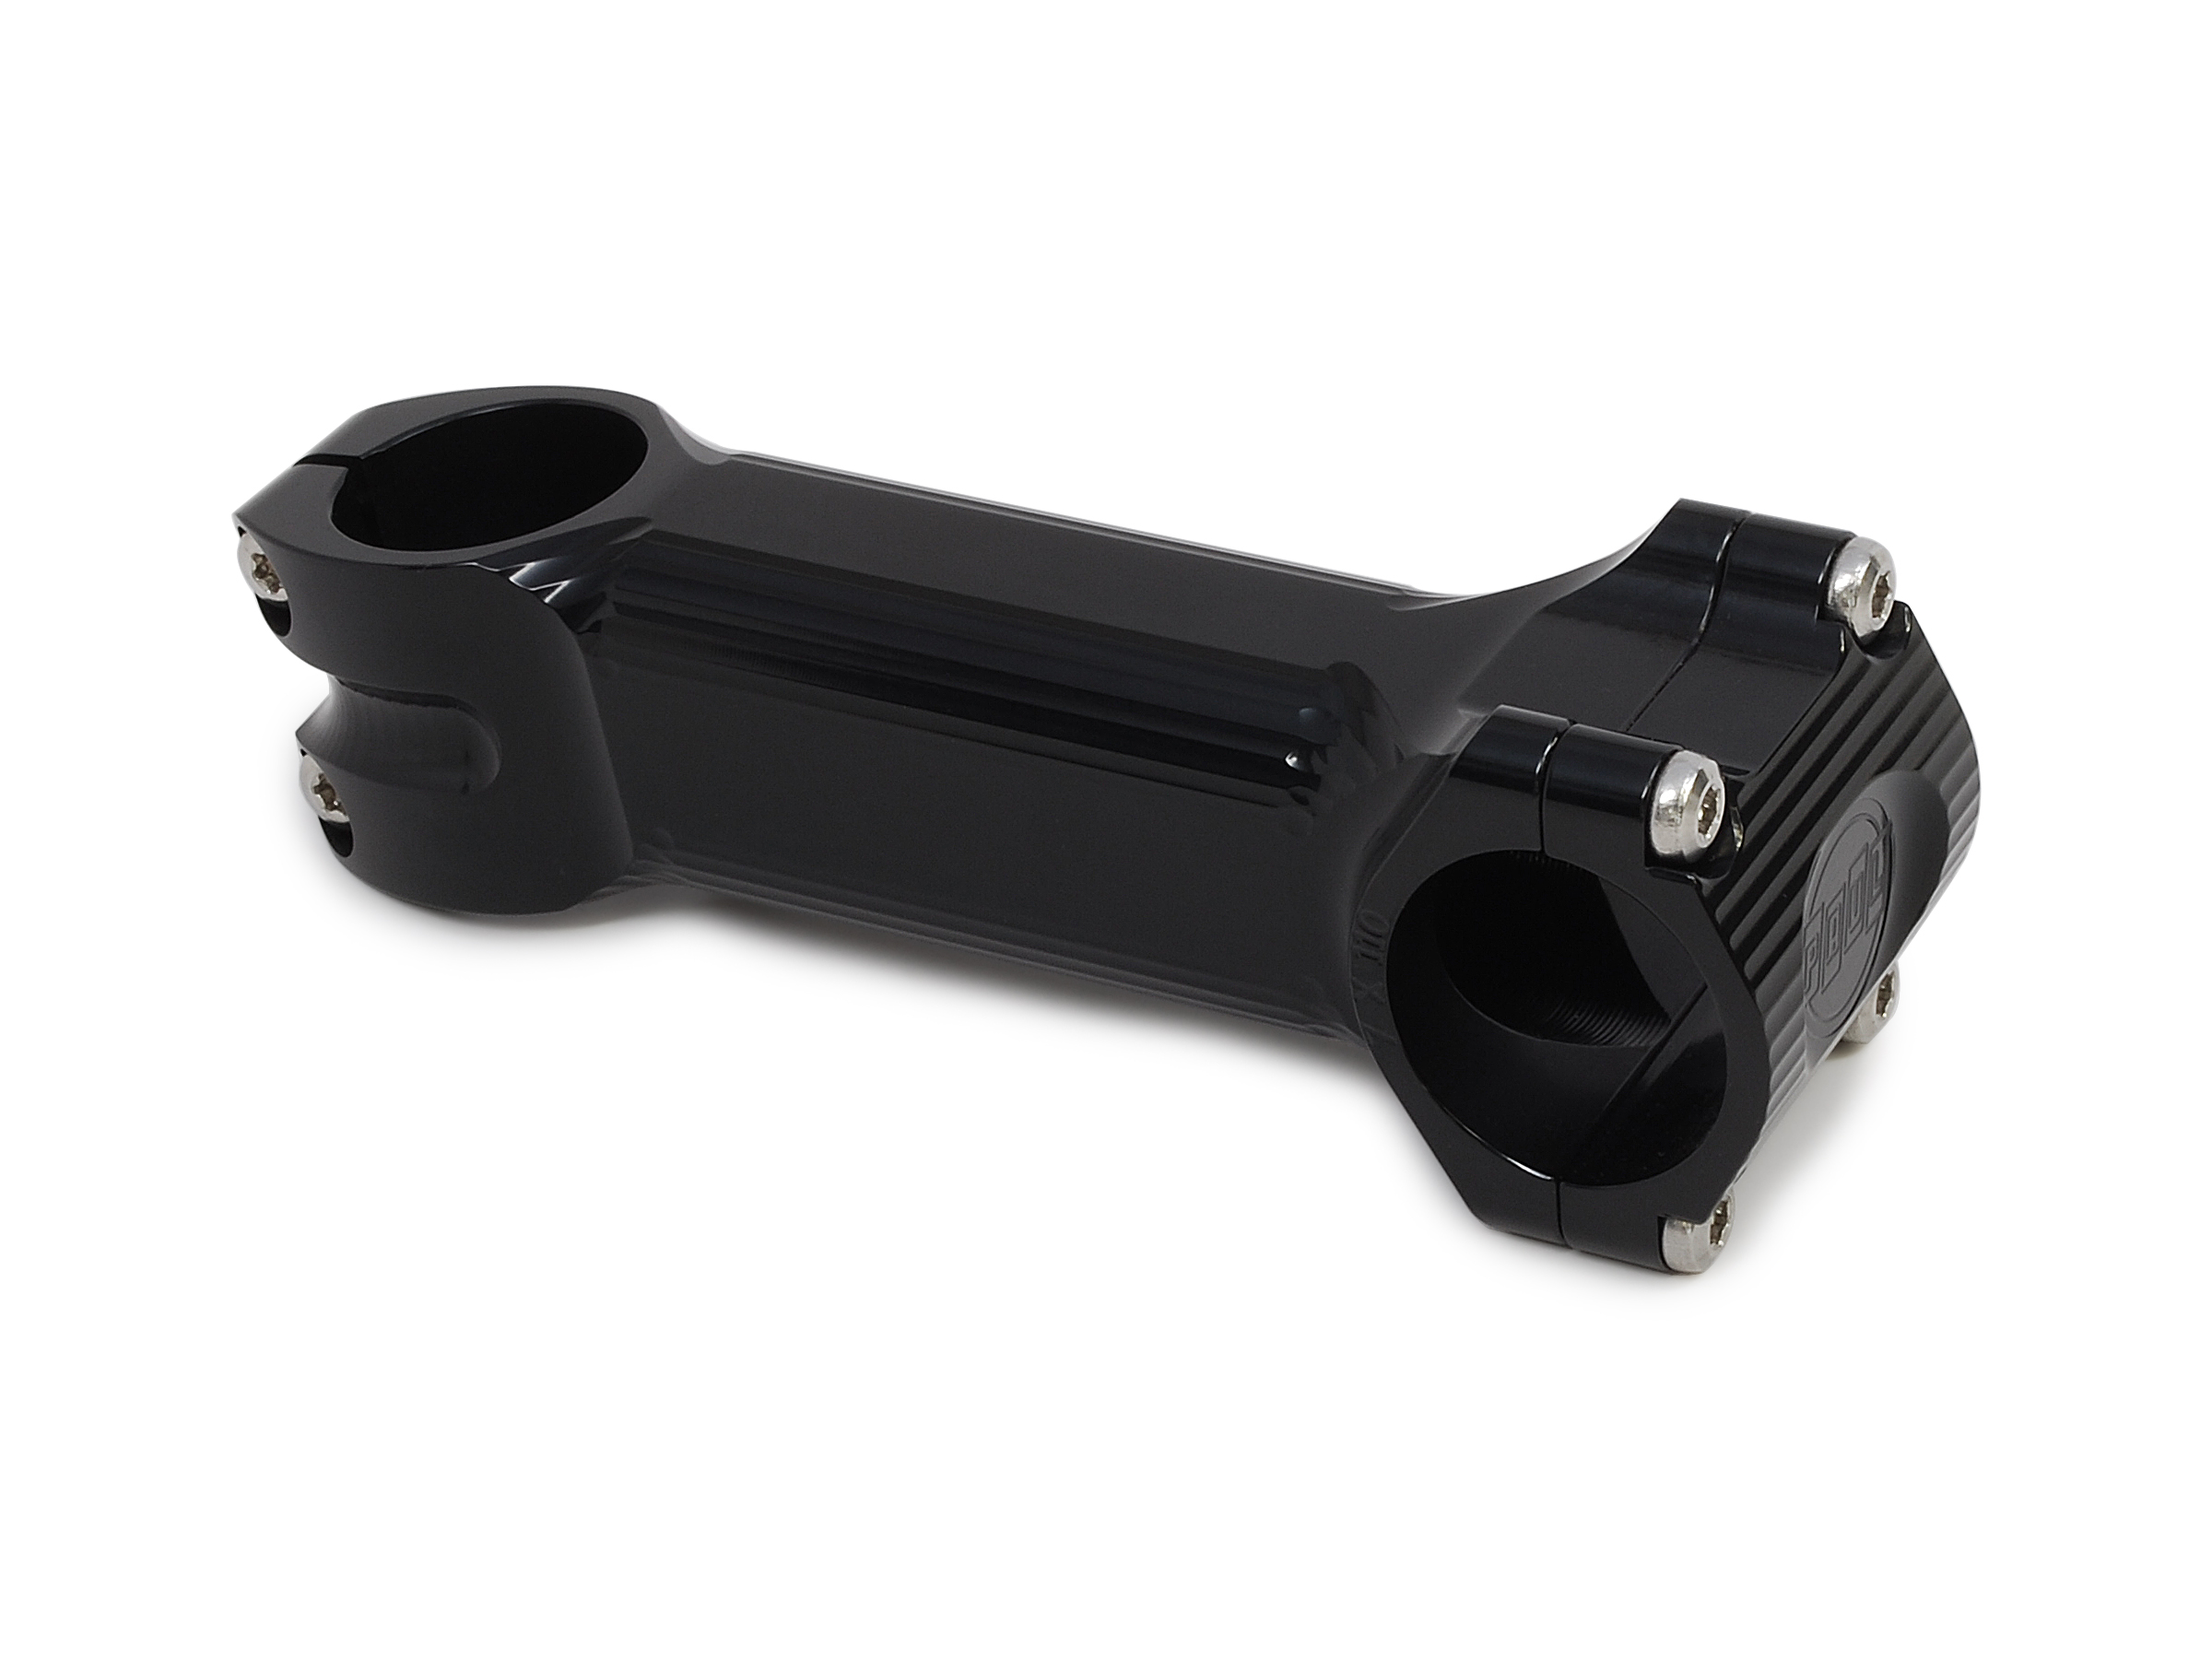 Paul Component Releases Boxcar Stem in 110mm